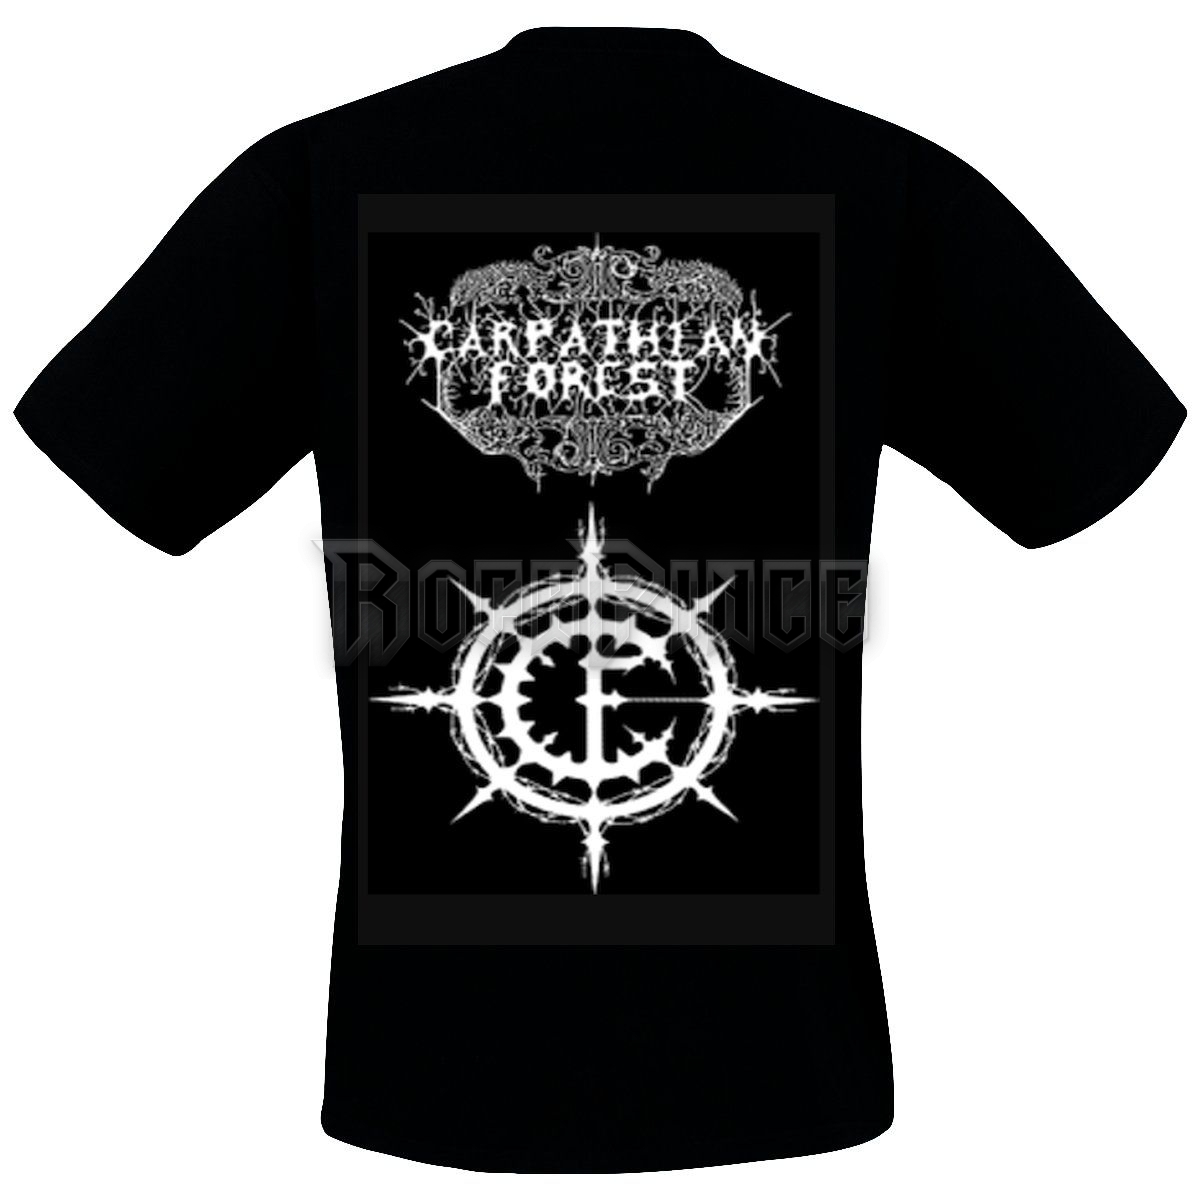 Carpathian Forest - We're Going To Hollywood - 684 - UNISEX PÓLÓ